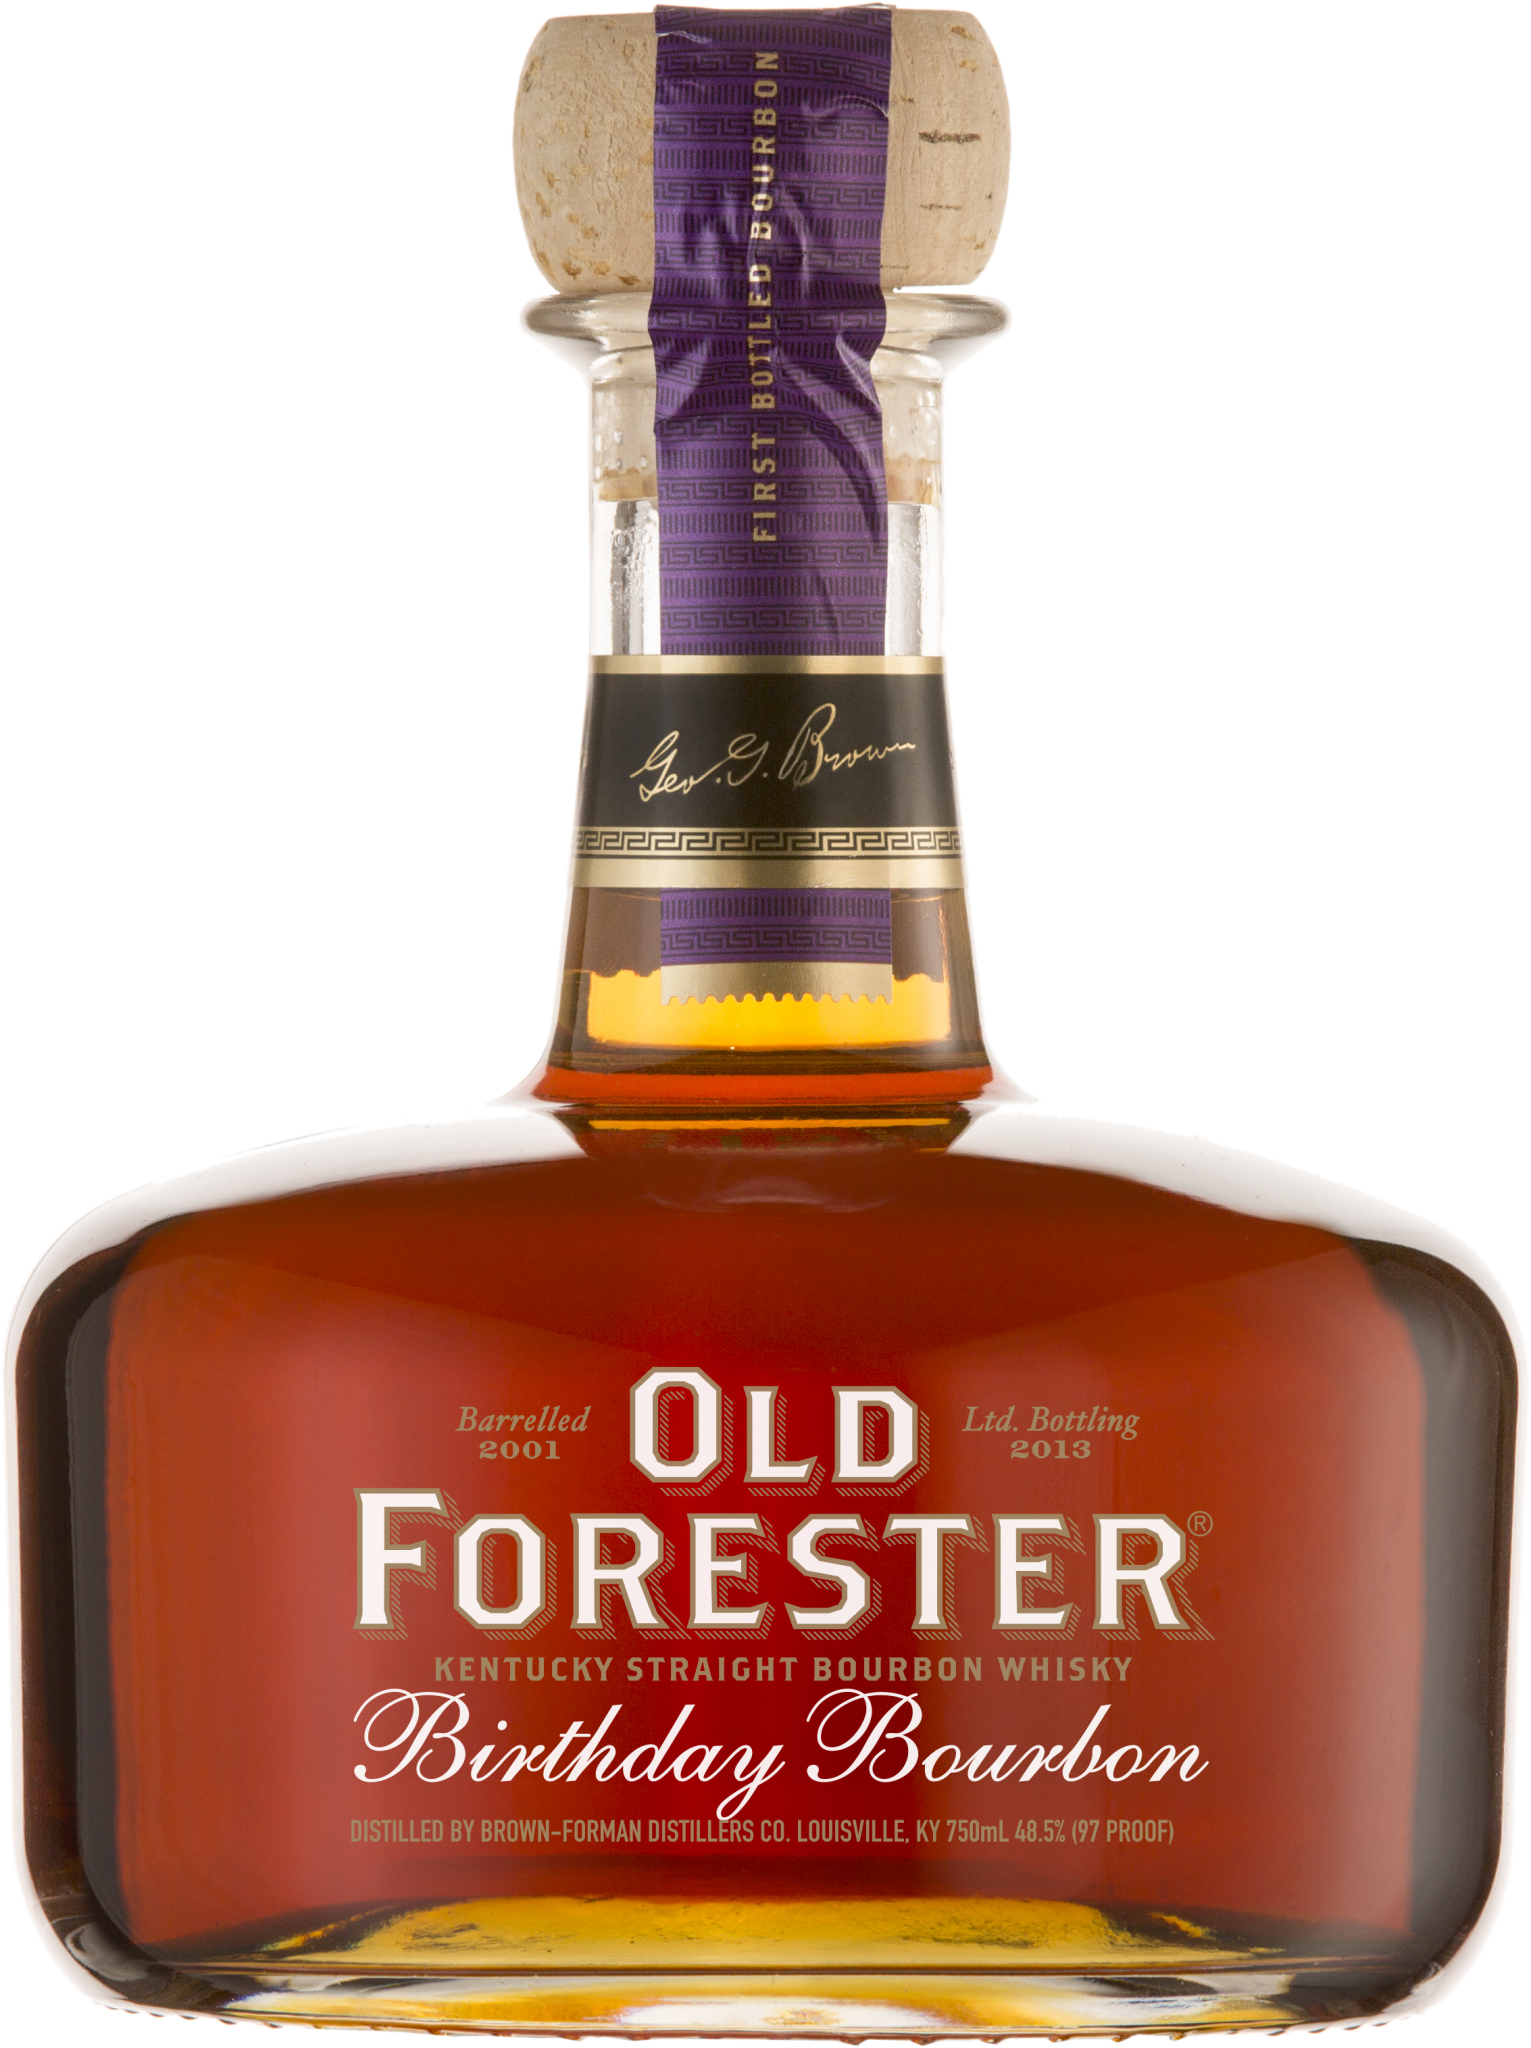 A bottle of Old Forester 2013 Birthday Bourbon on a black background.